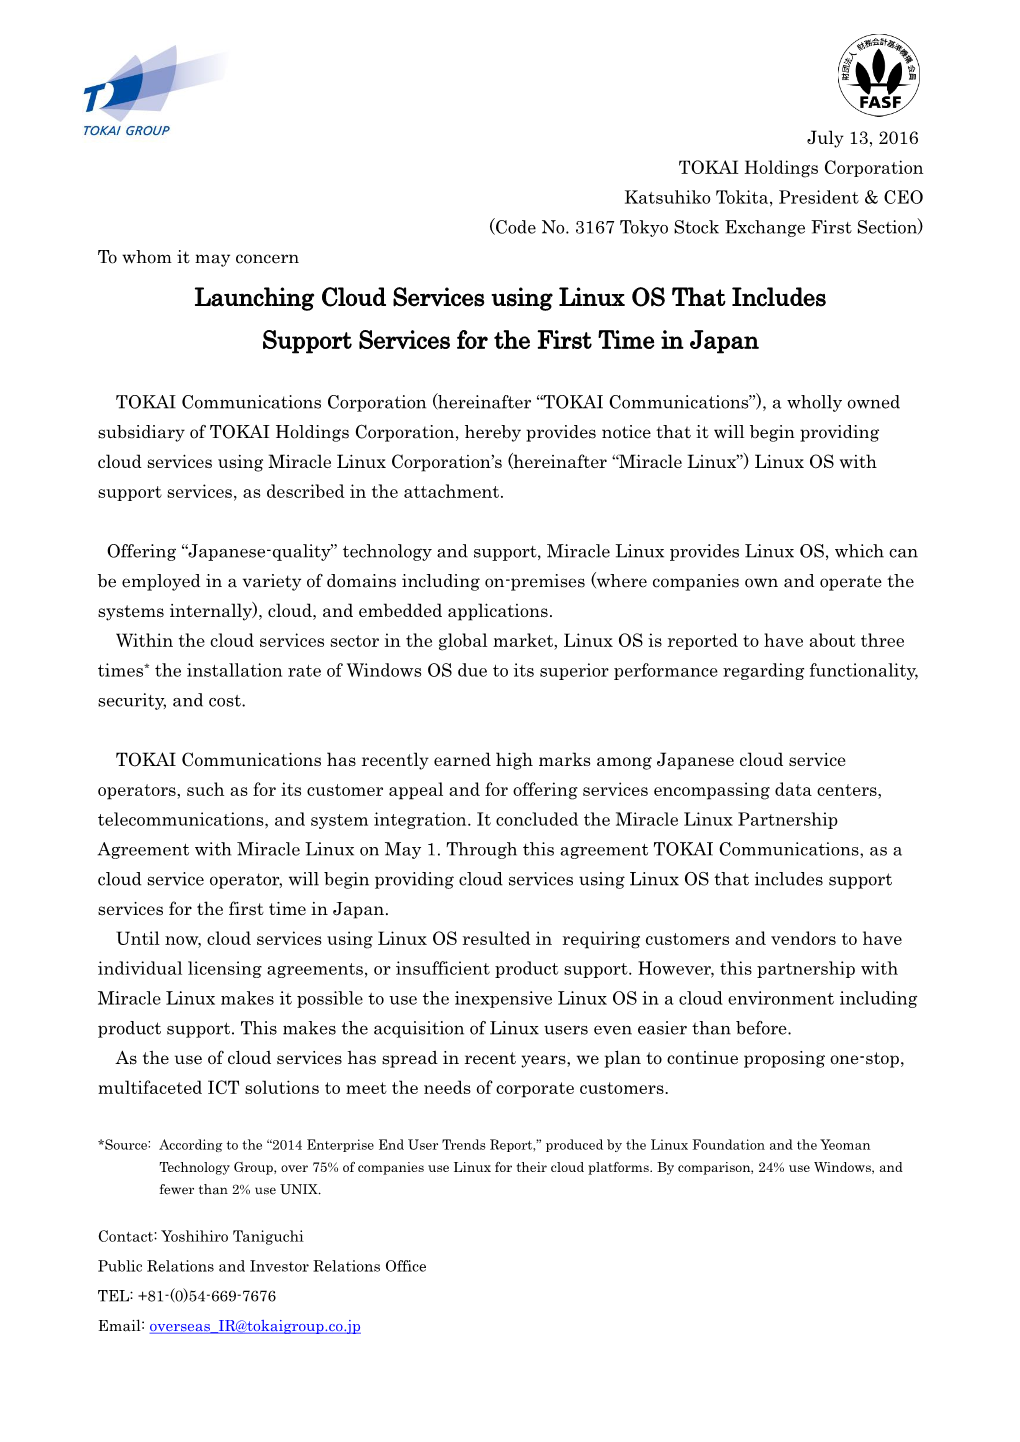 Launching Cloud Services Using Linux OS That Includes Support Services for the First Time in Japan